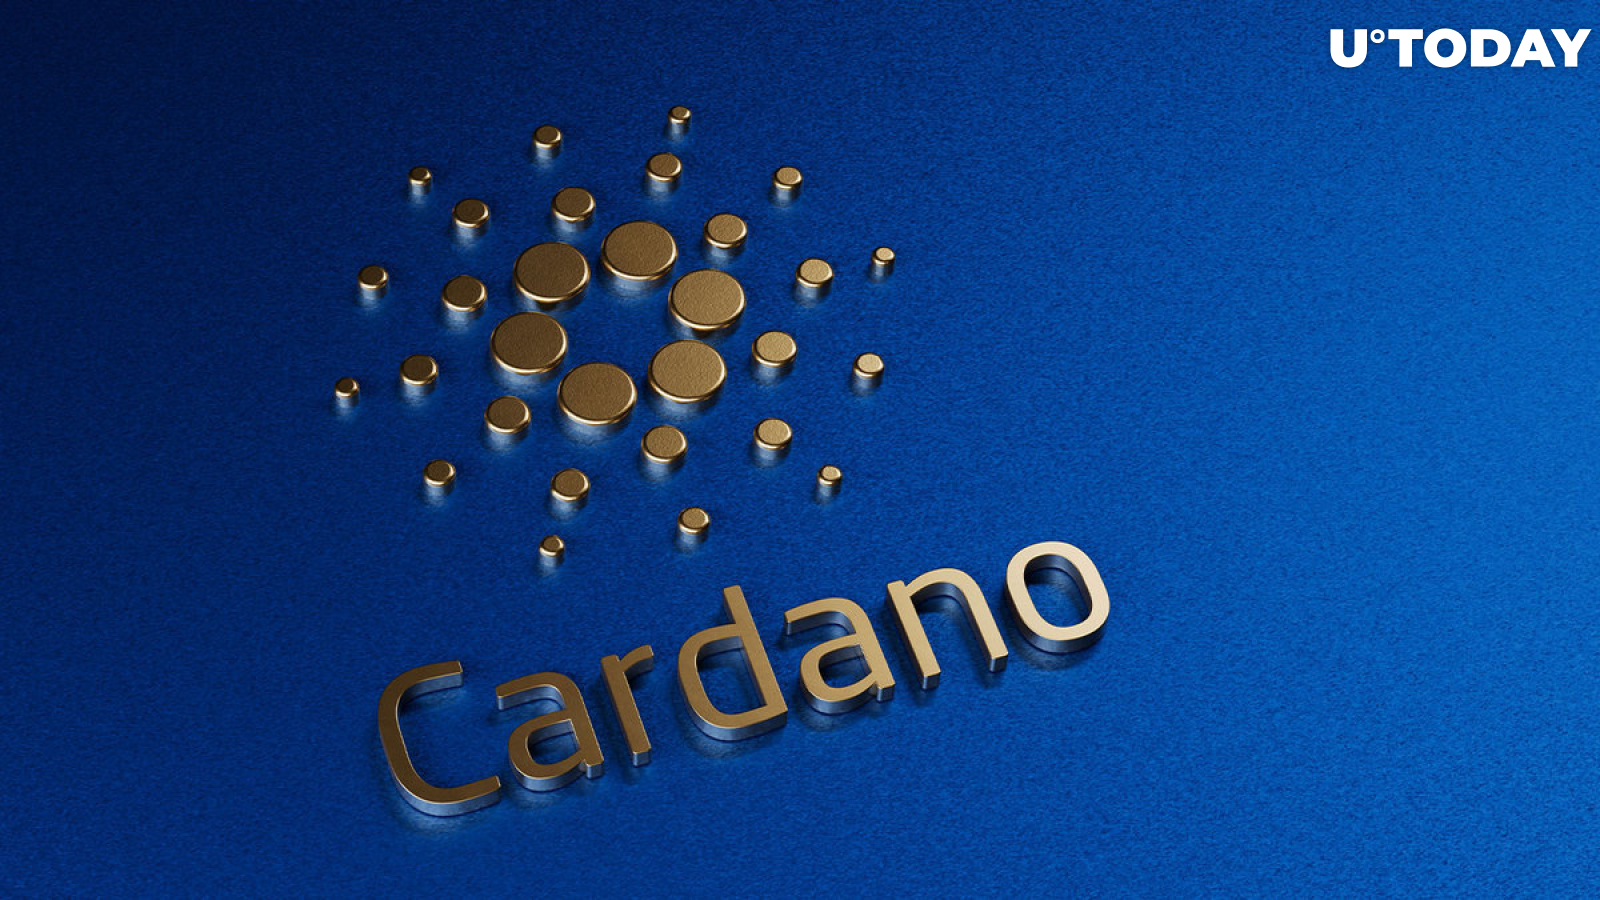 Cardano (ADA) Flashes Head and Shoulder Pattern, Is Breakout Imminent?